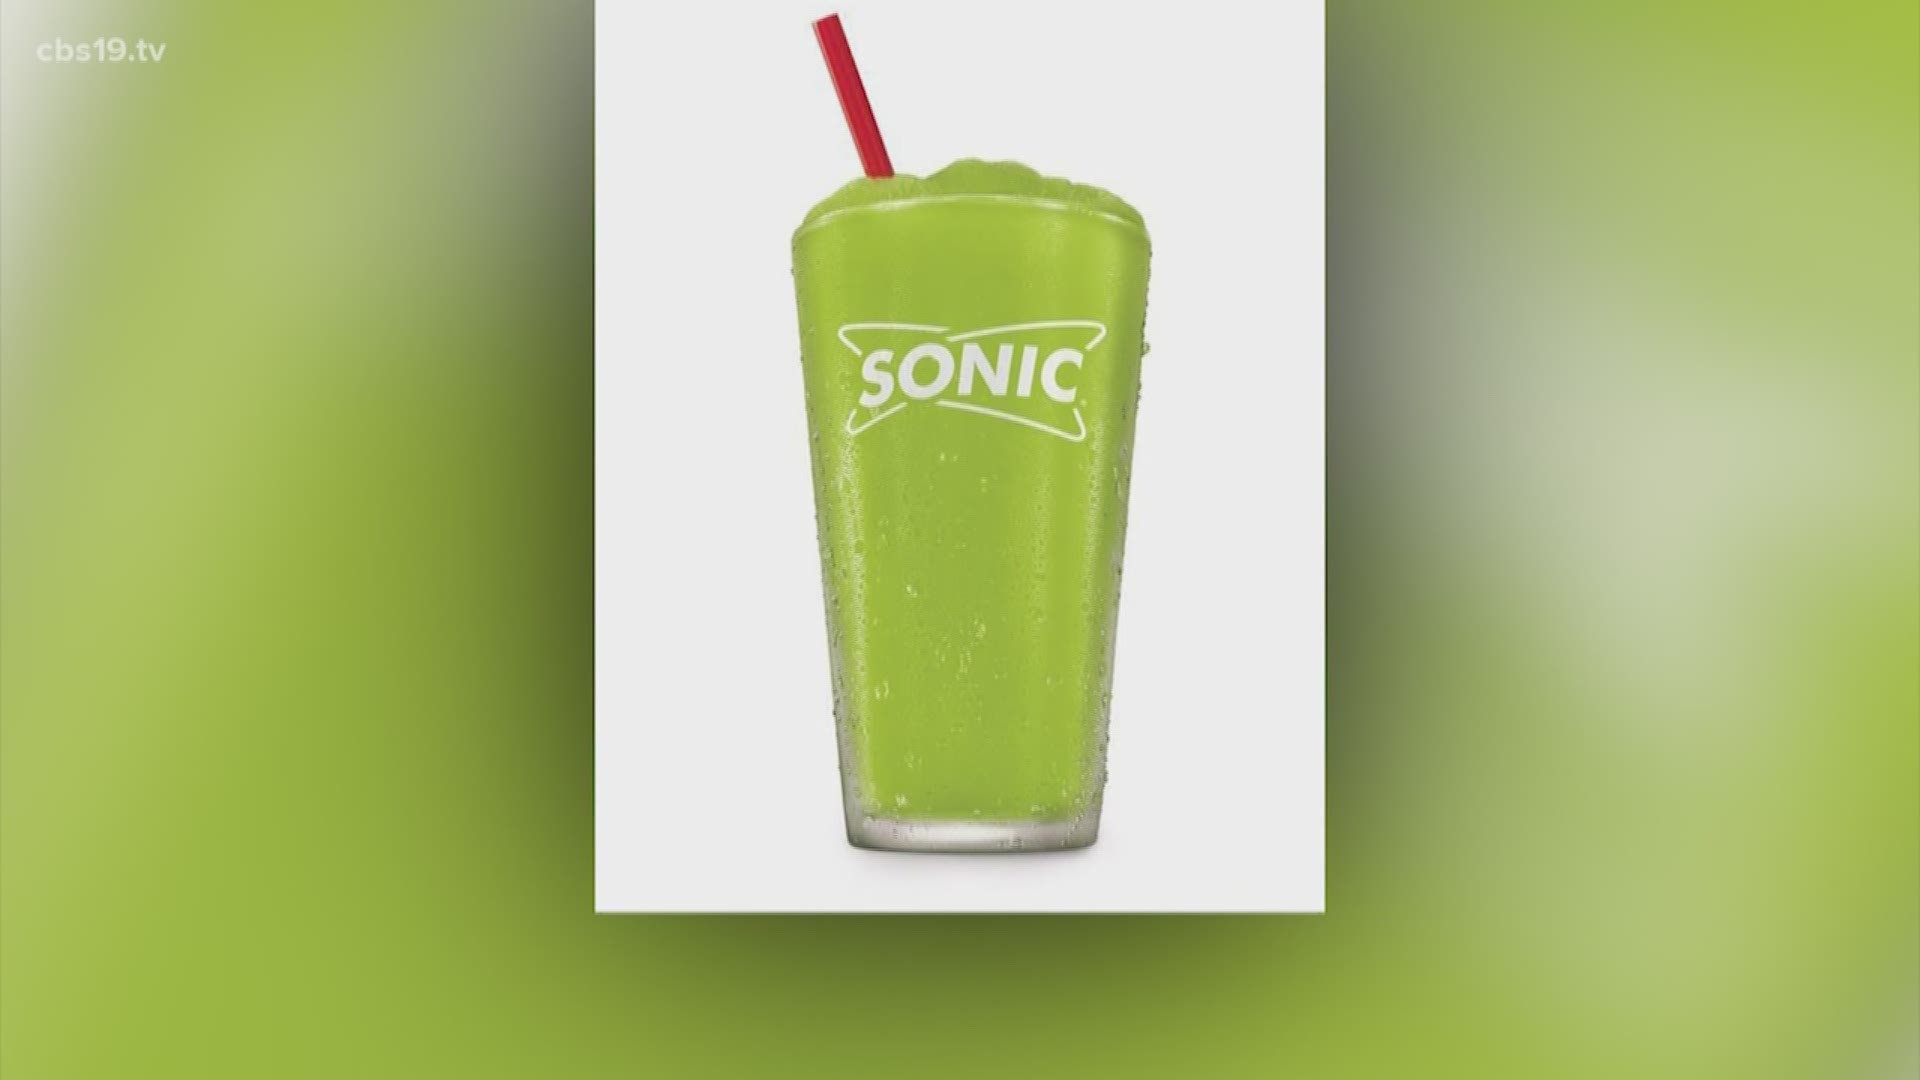 Sonic reveals a new pickle flavored slushie.